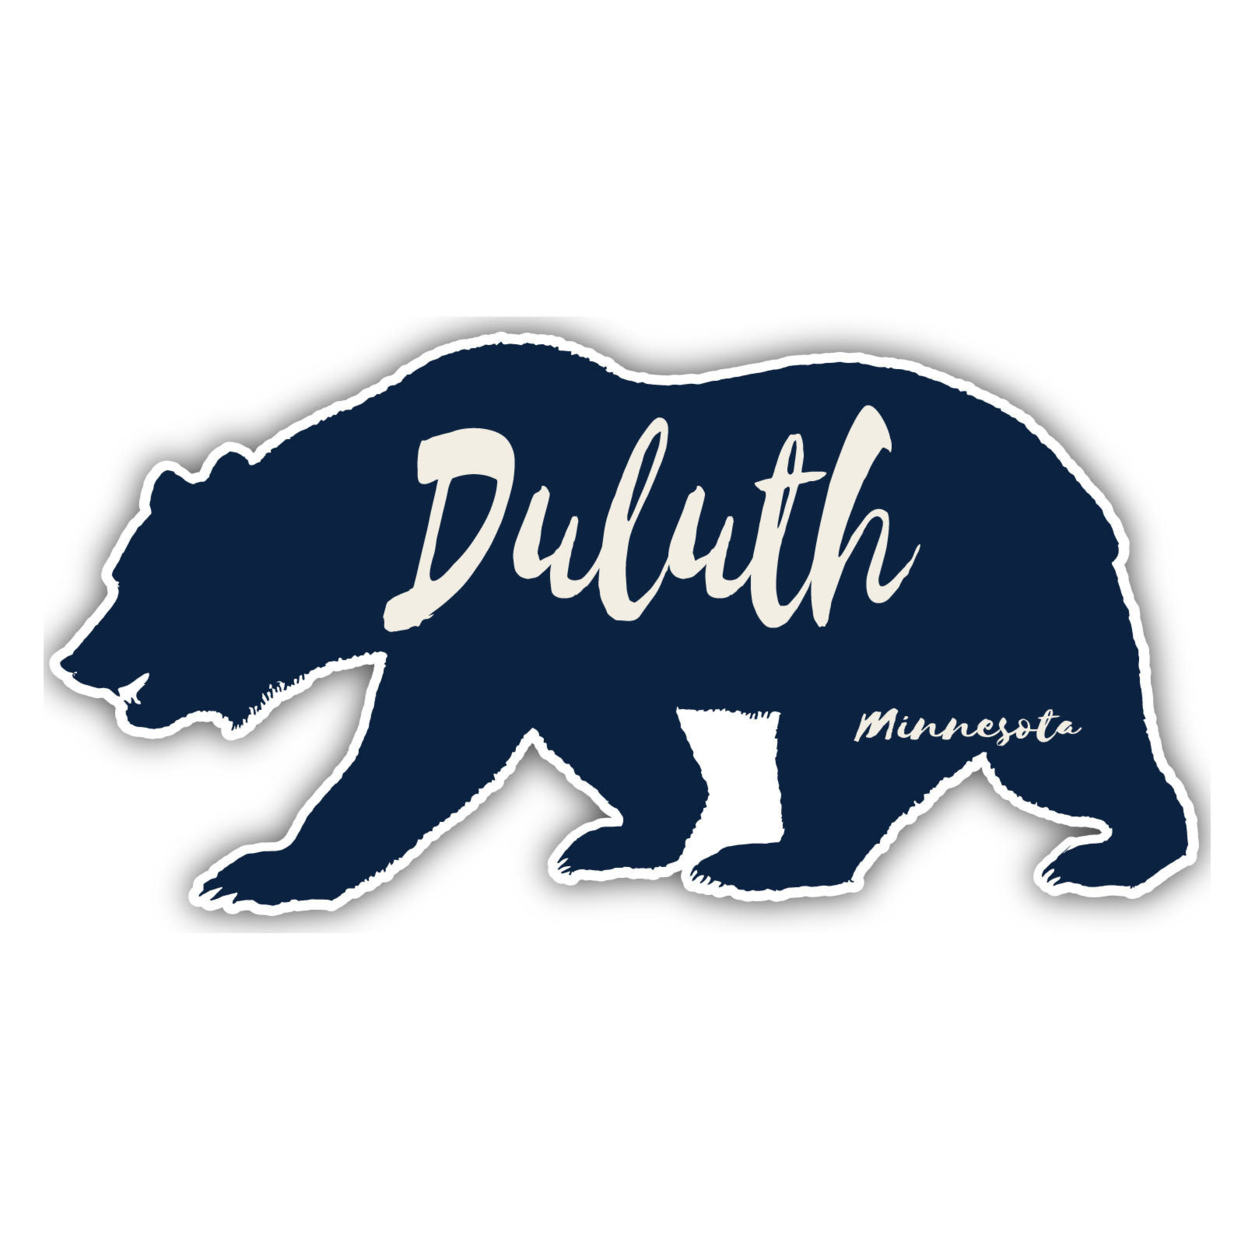 Duluth Minnesota Souvenir Decorative Stickers (Choose Theme And Size) - 4-Pack, 10-Inch, Tent